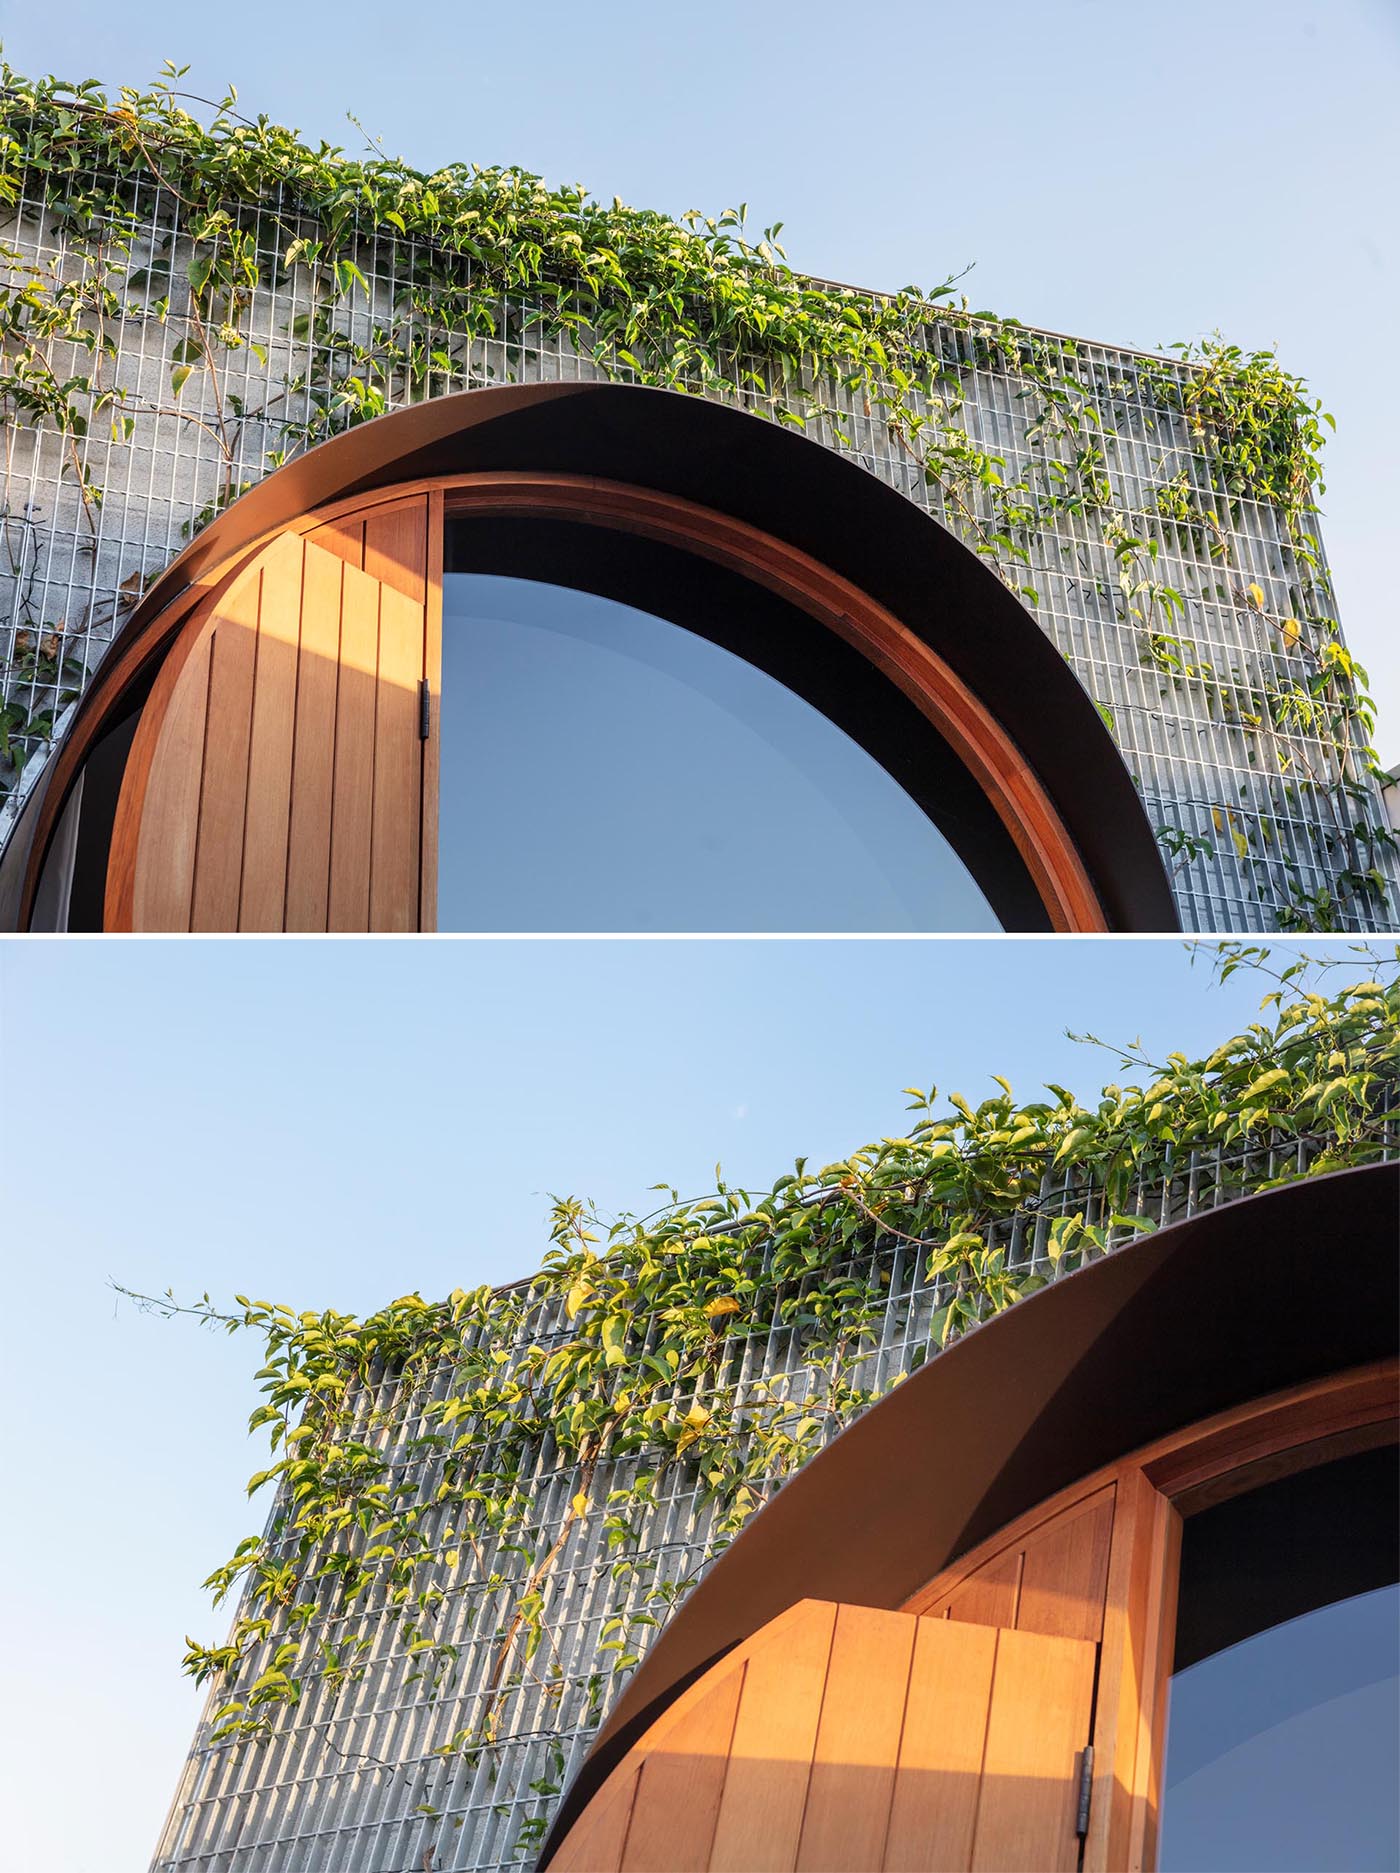 A wall of vines will grow to wrap around this round window.